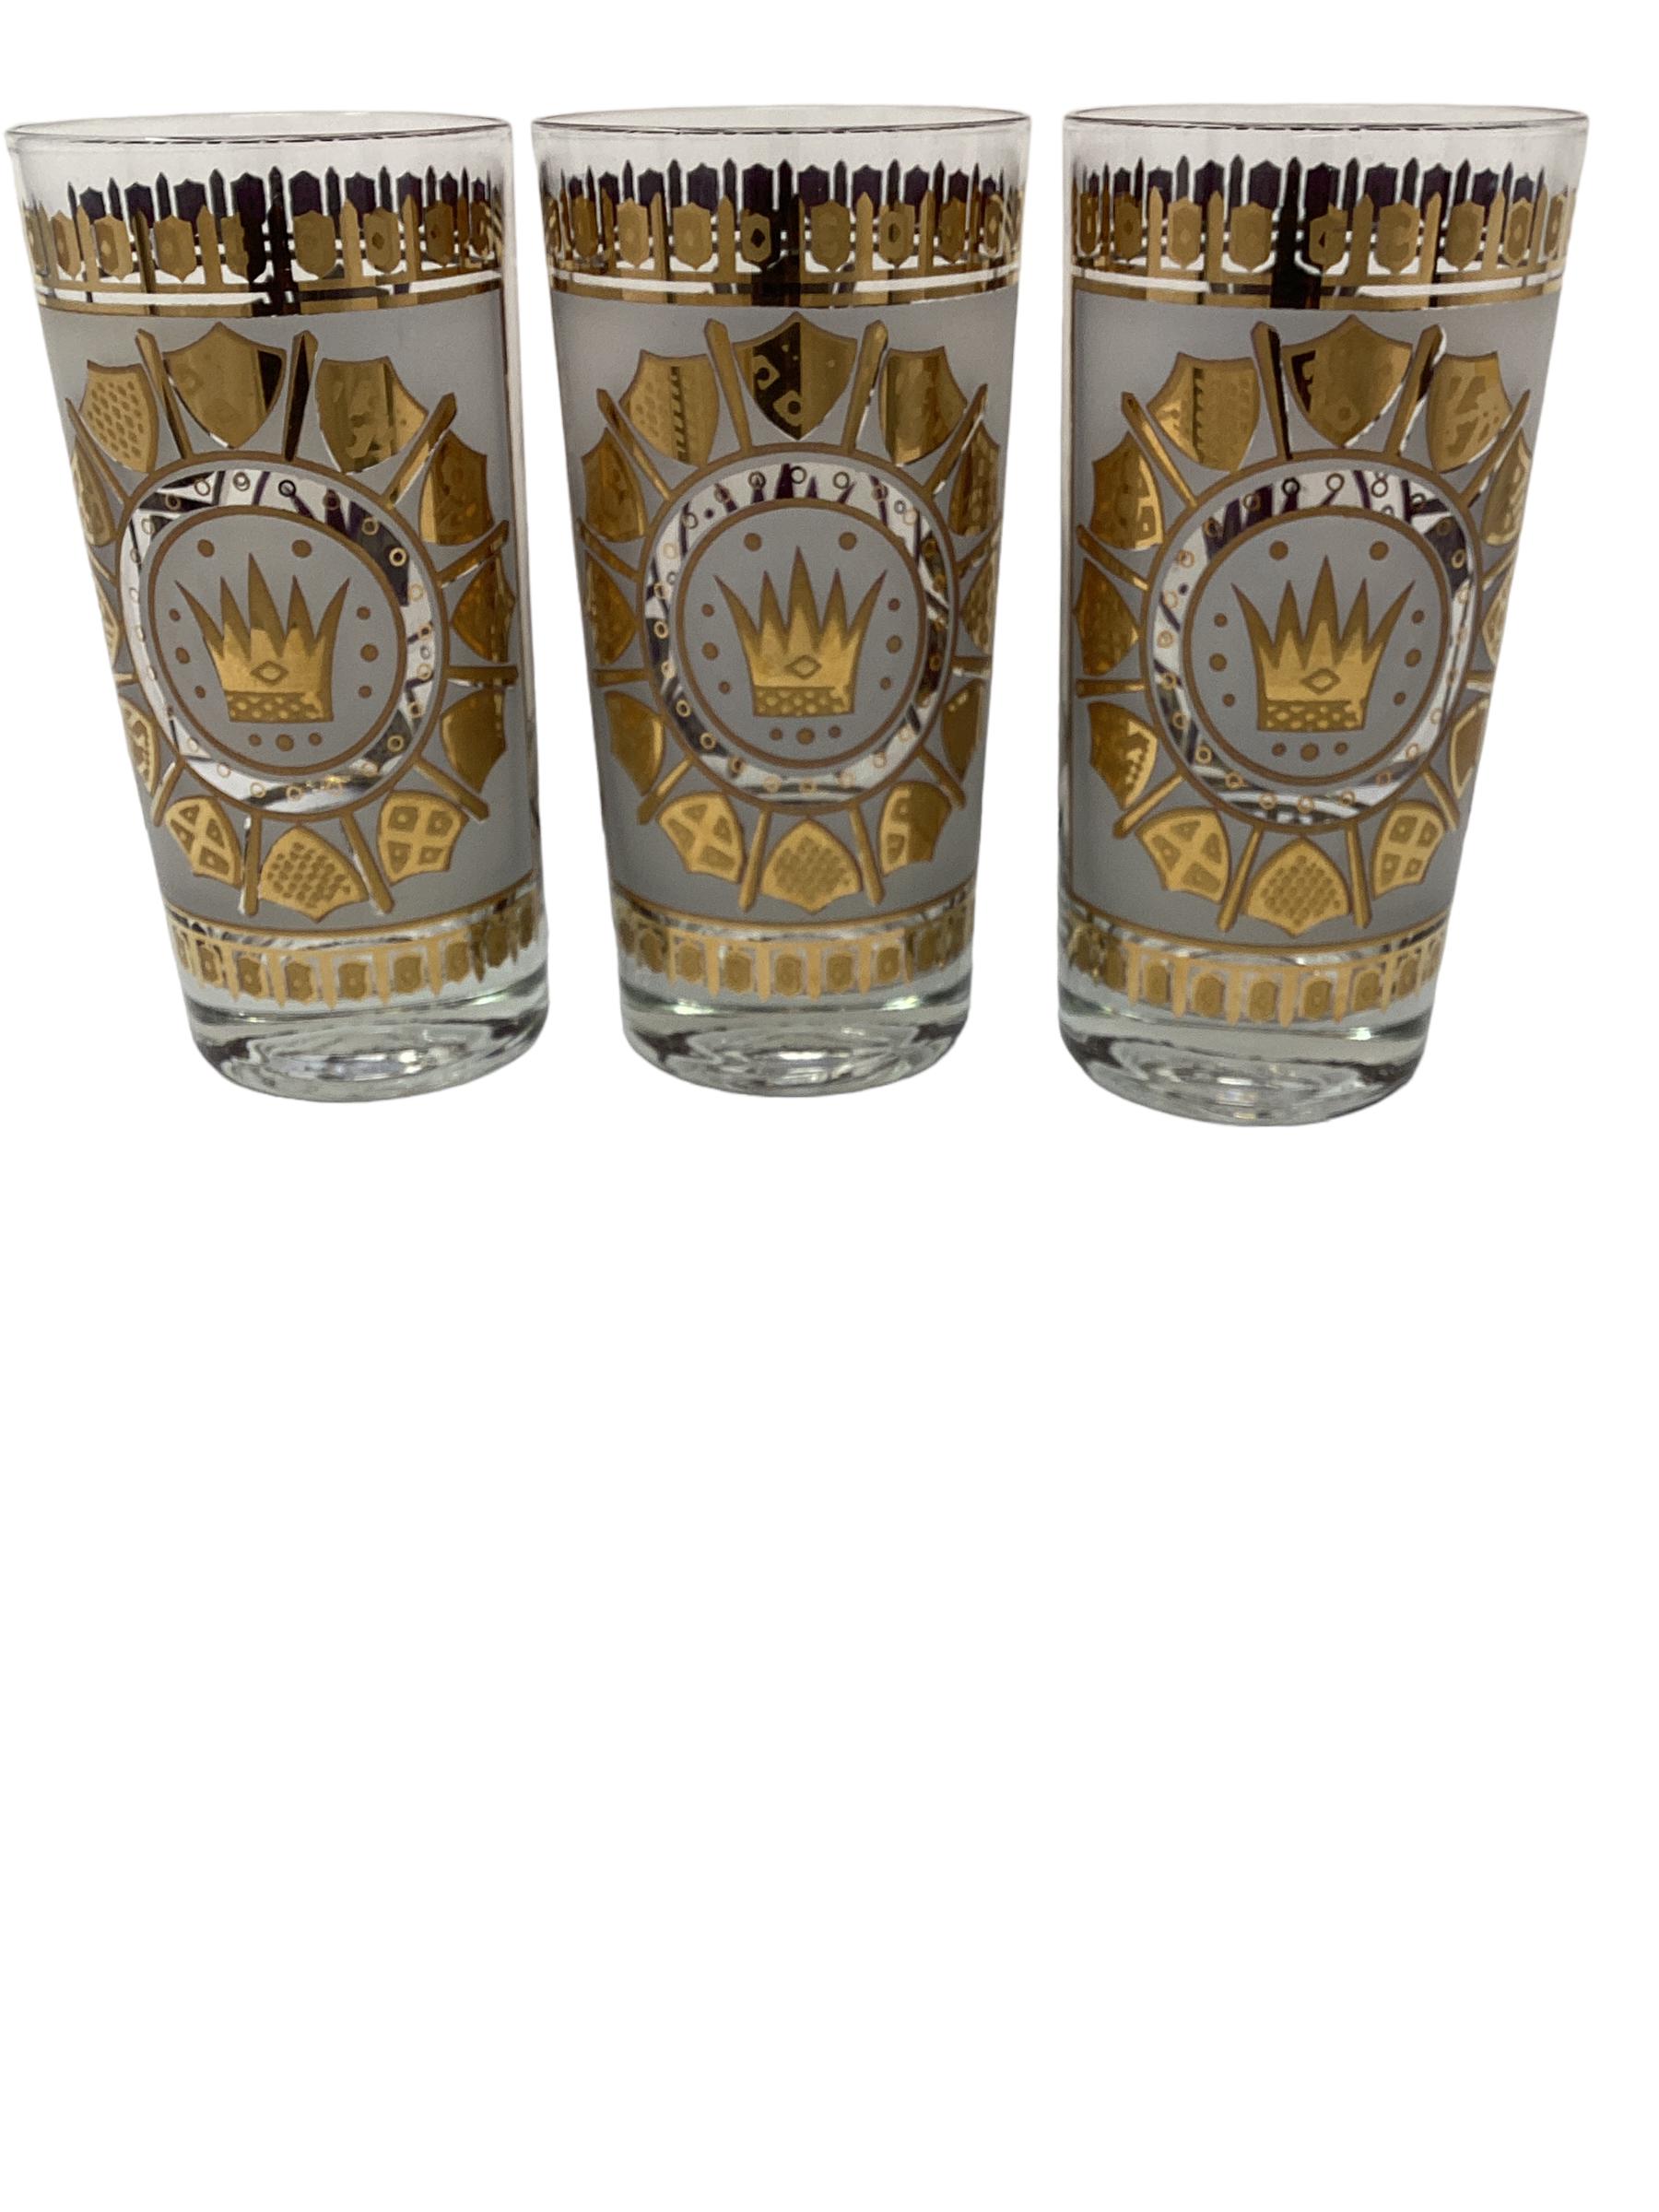 Set of 8 Vintage Mid Century Highball Glasses with Shields and Crown Decorations on a white frosted background.